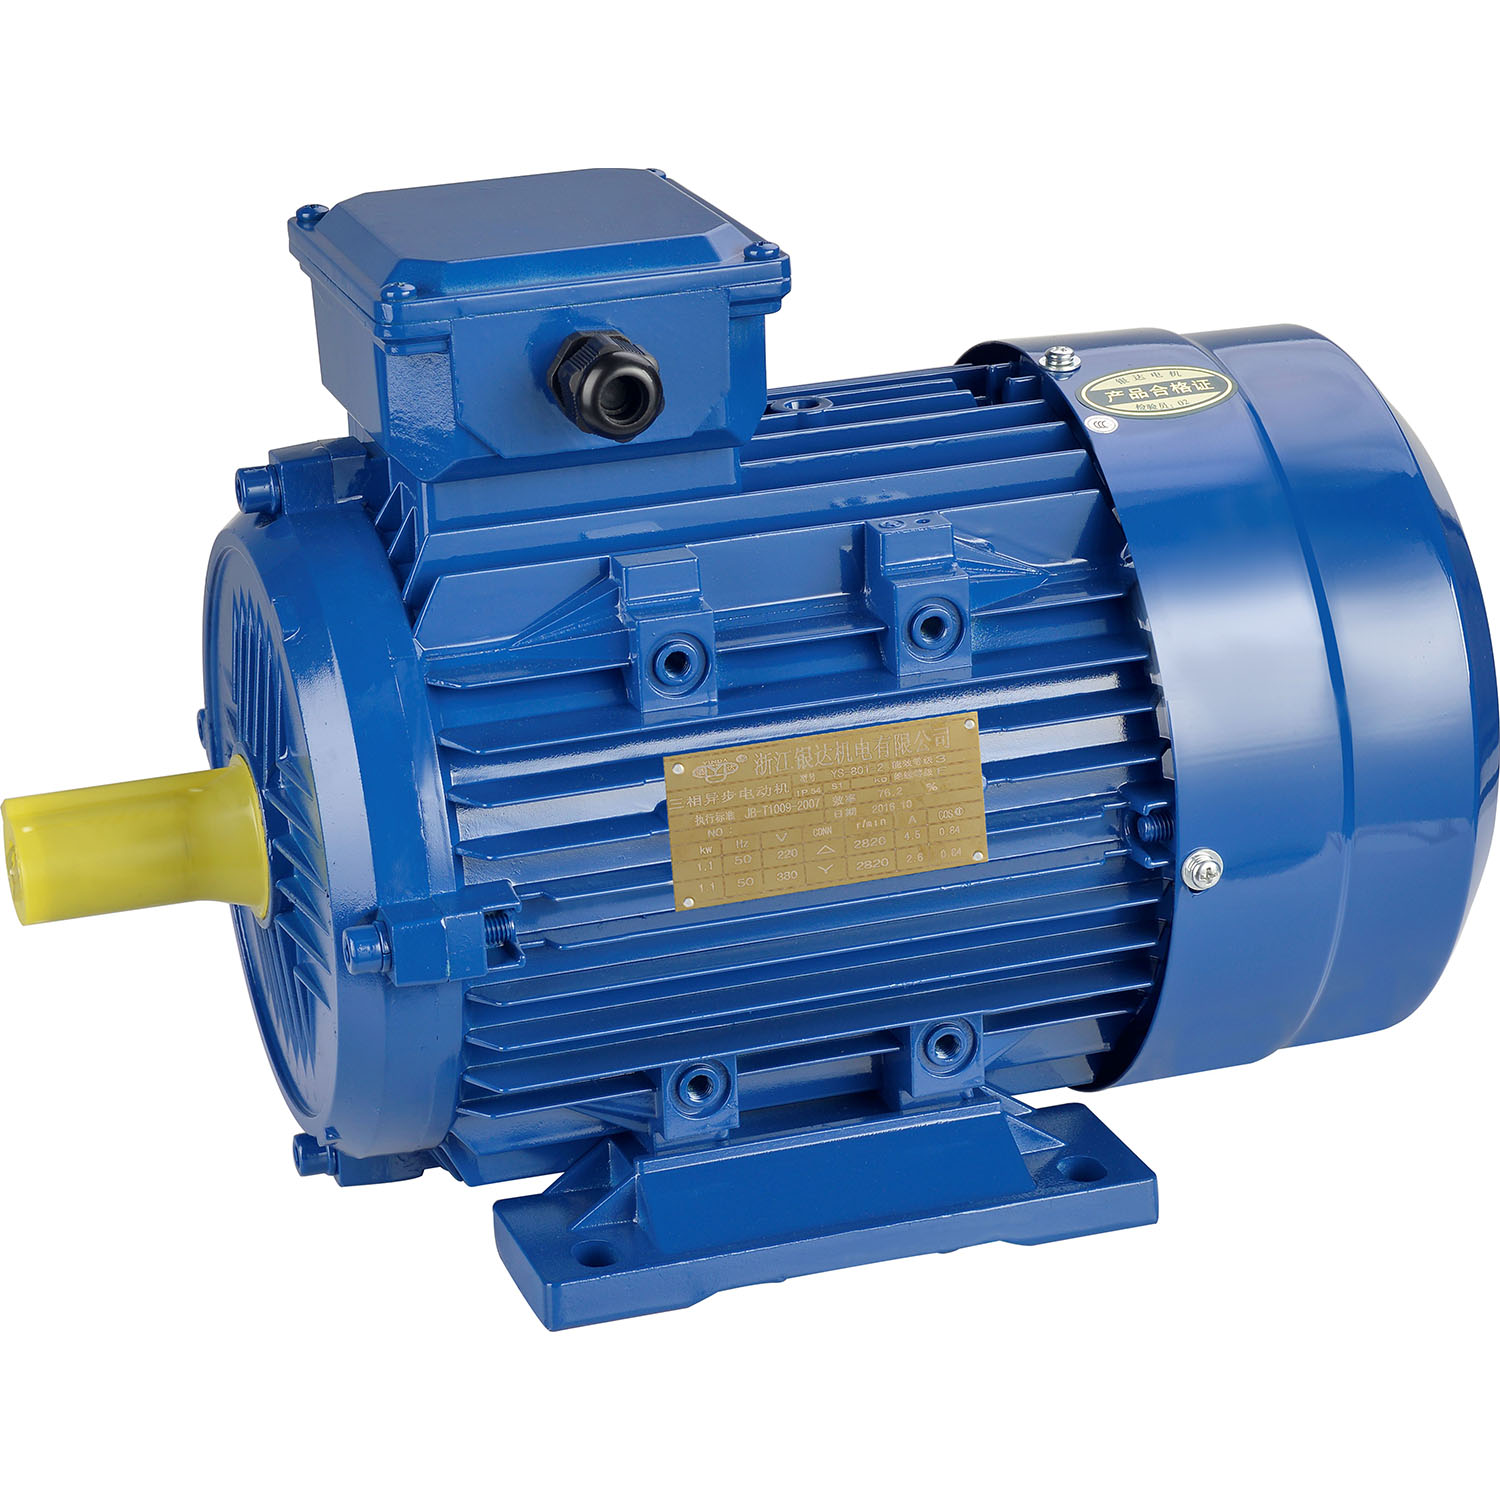 YS-633-4 0.25KW 0.35HP aluminum cylinder series high efficiency three-phase asynchronous motor